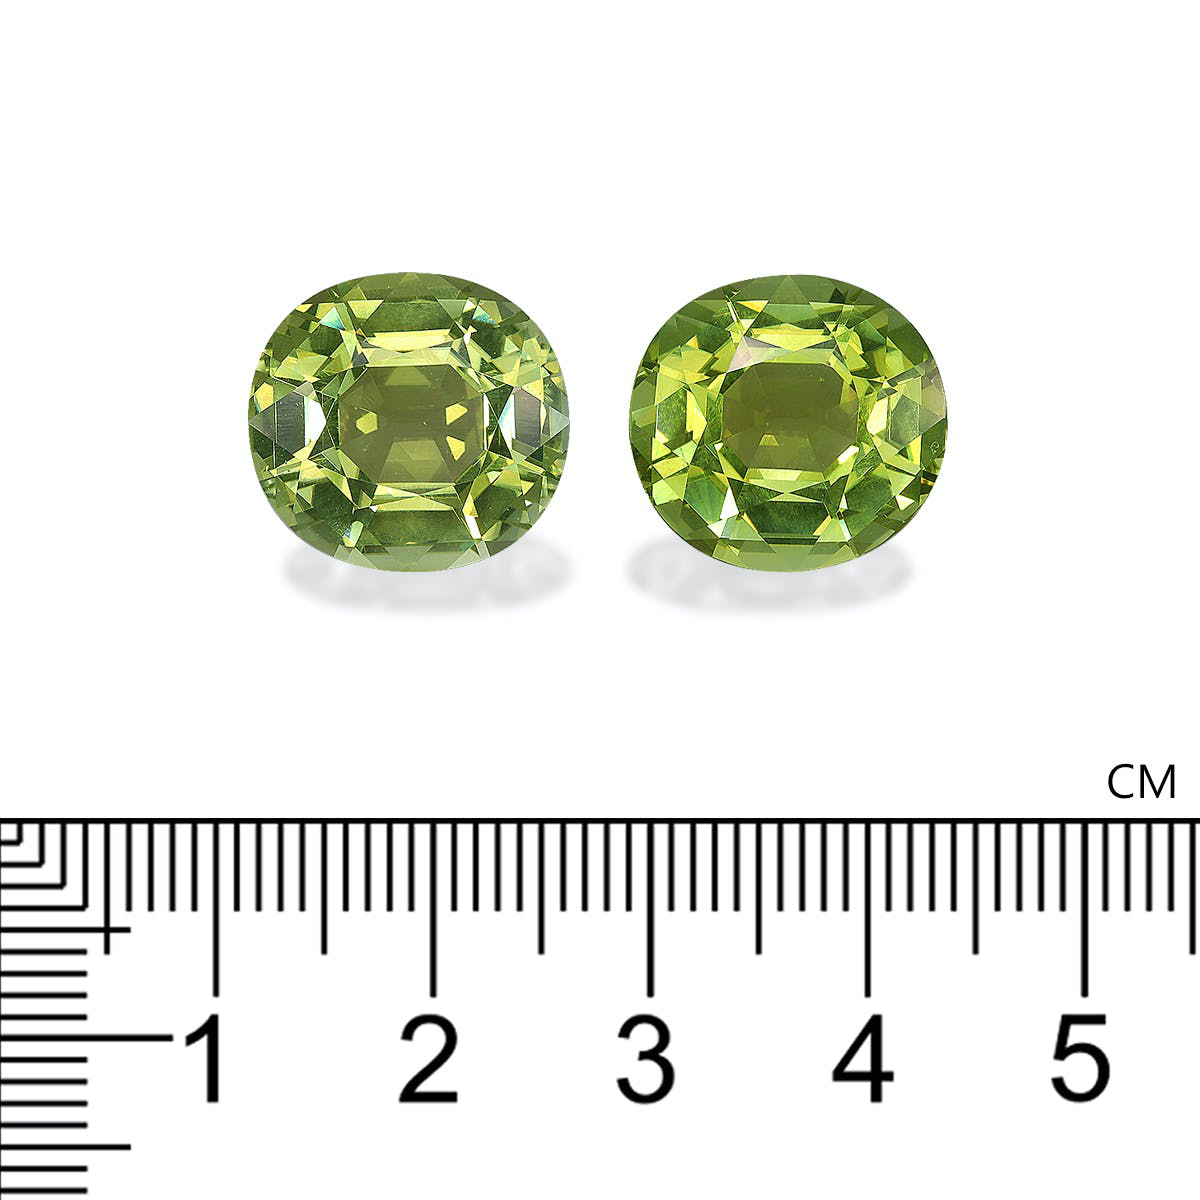 Picture of Lime Green Cuprian Tourmaline 22.97ct - Pair (MZ0250)